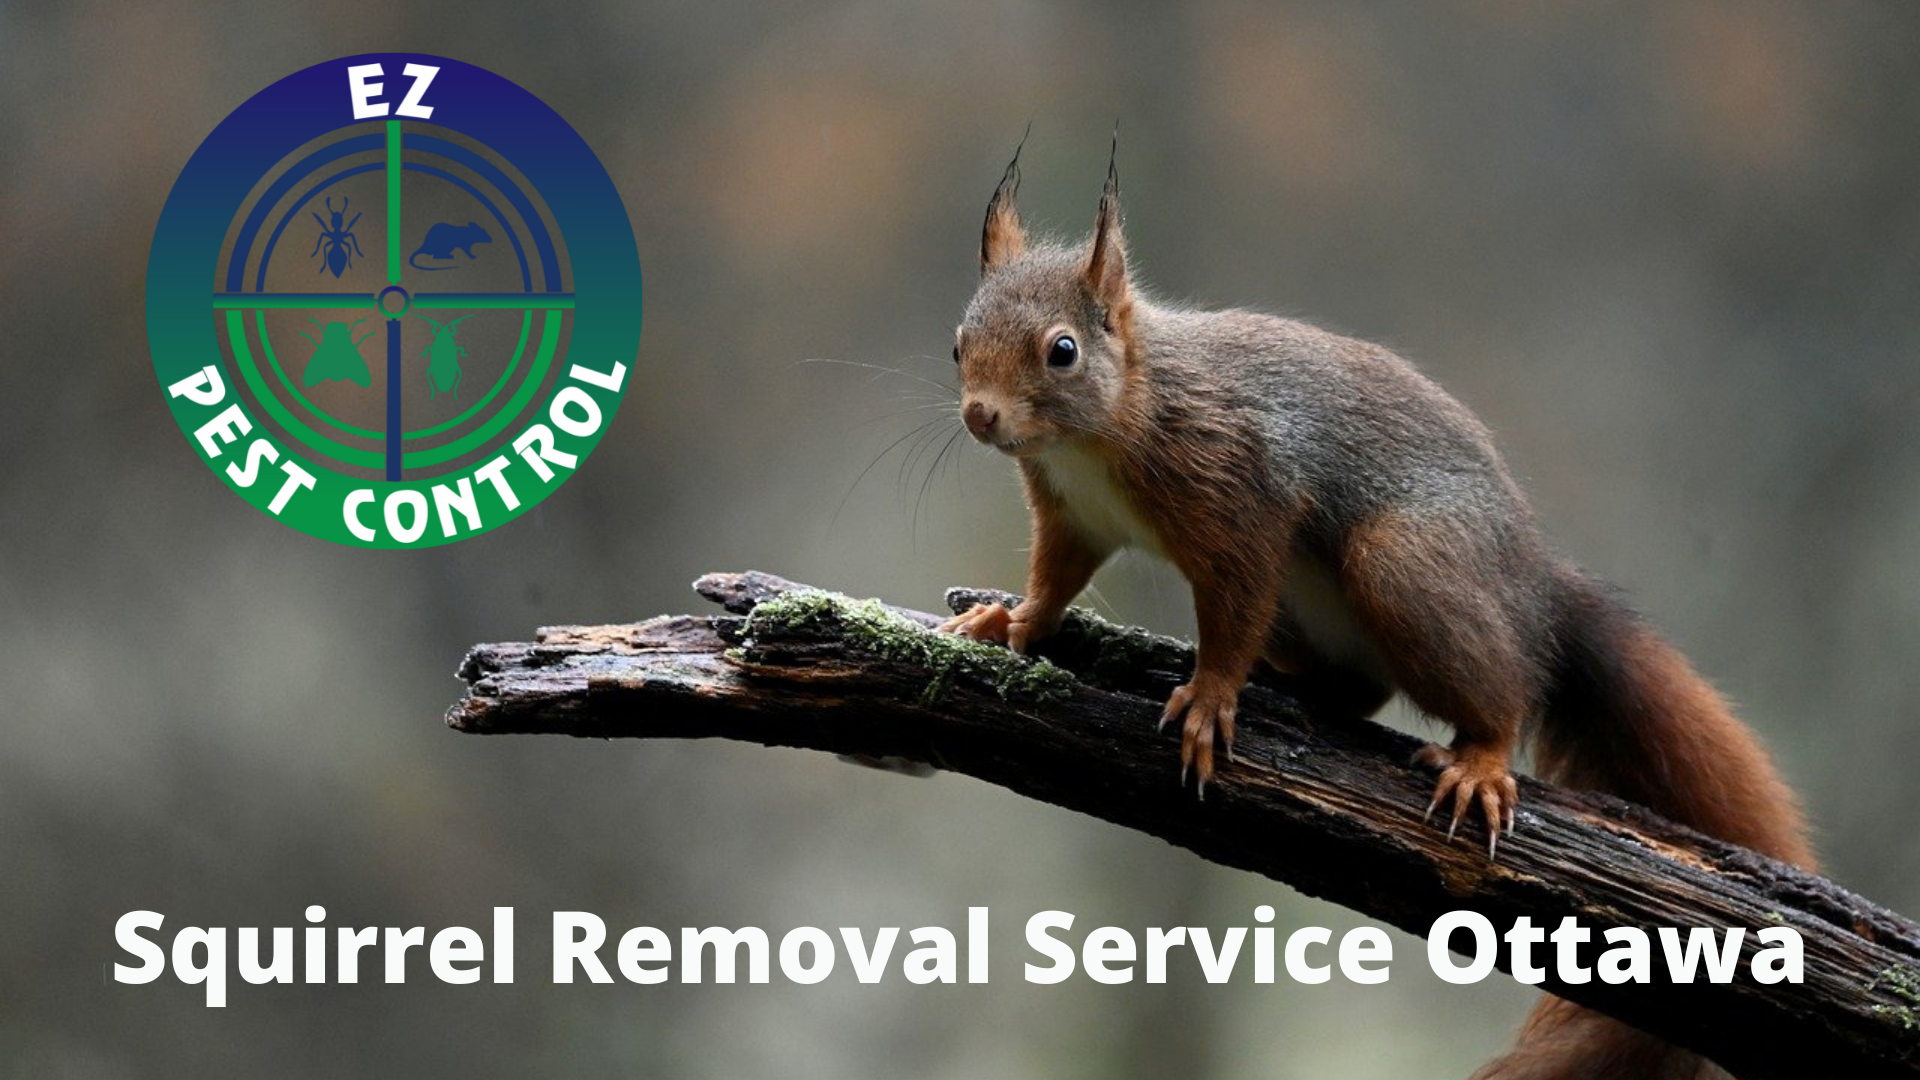 | ¥ 4

 

—
a

Squirrel Removal a IEEE